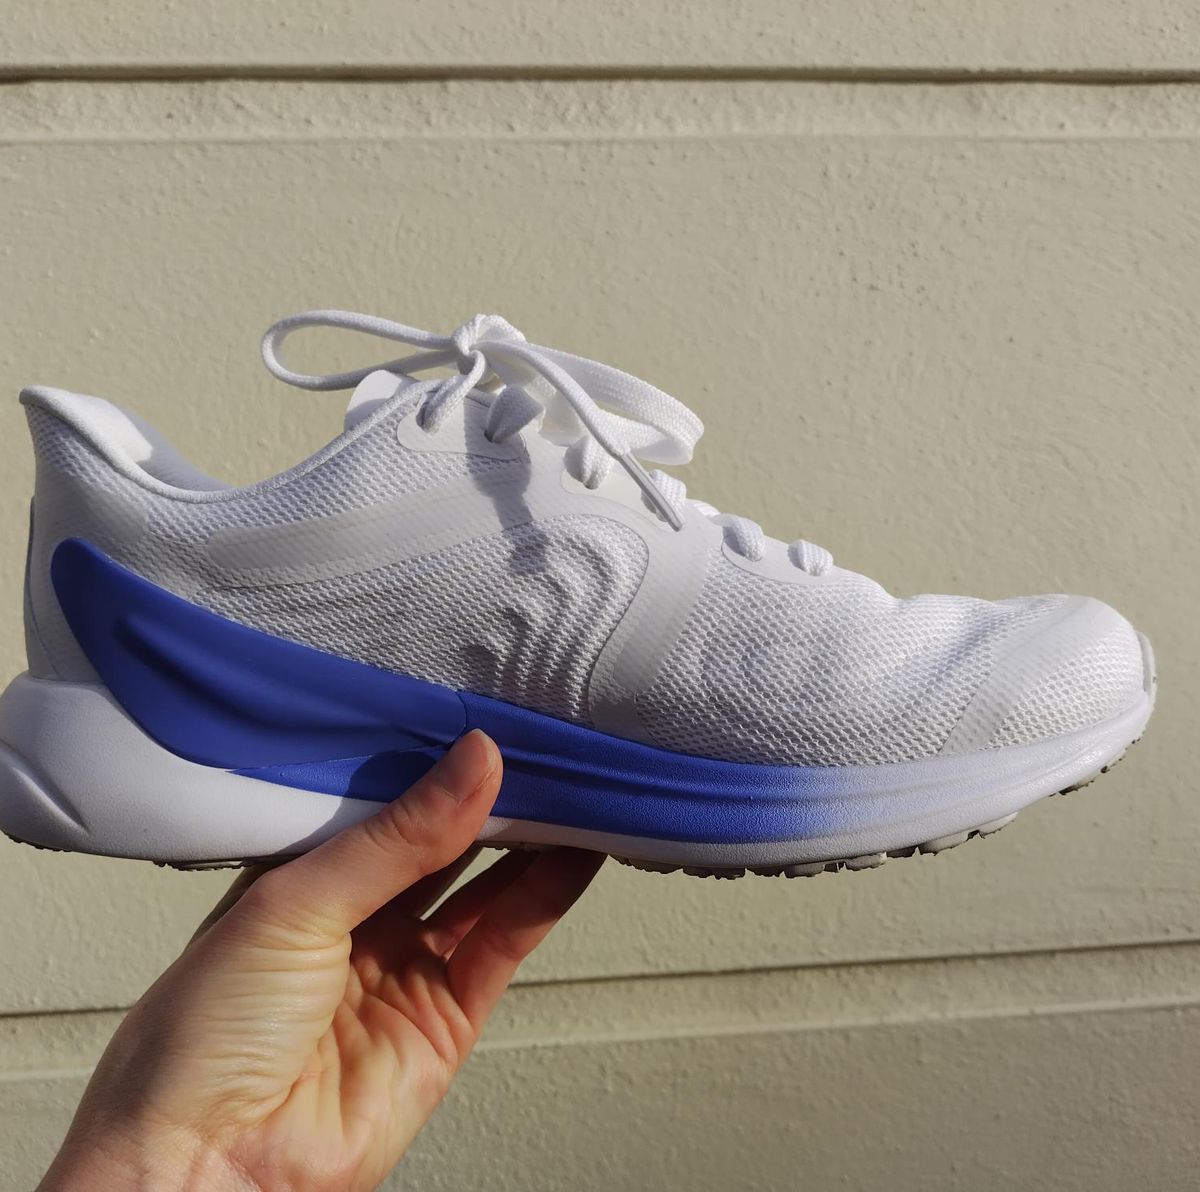 Lululemon Shoes Review: Lululemon makes outstanding shoes for any